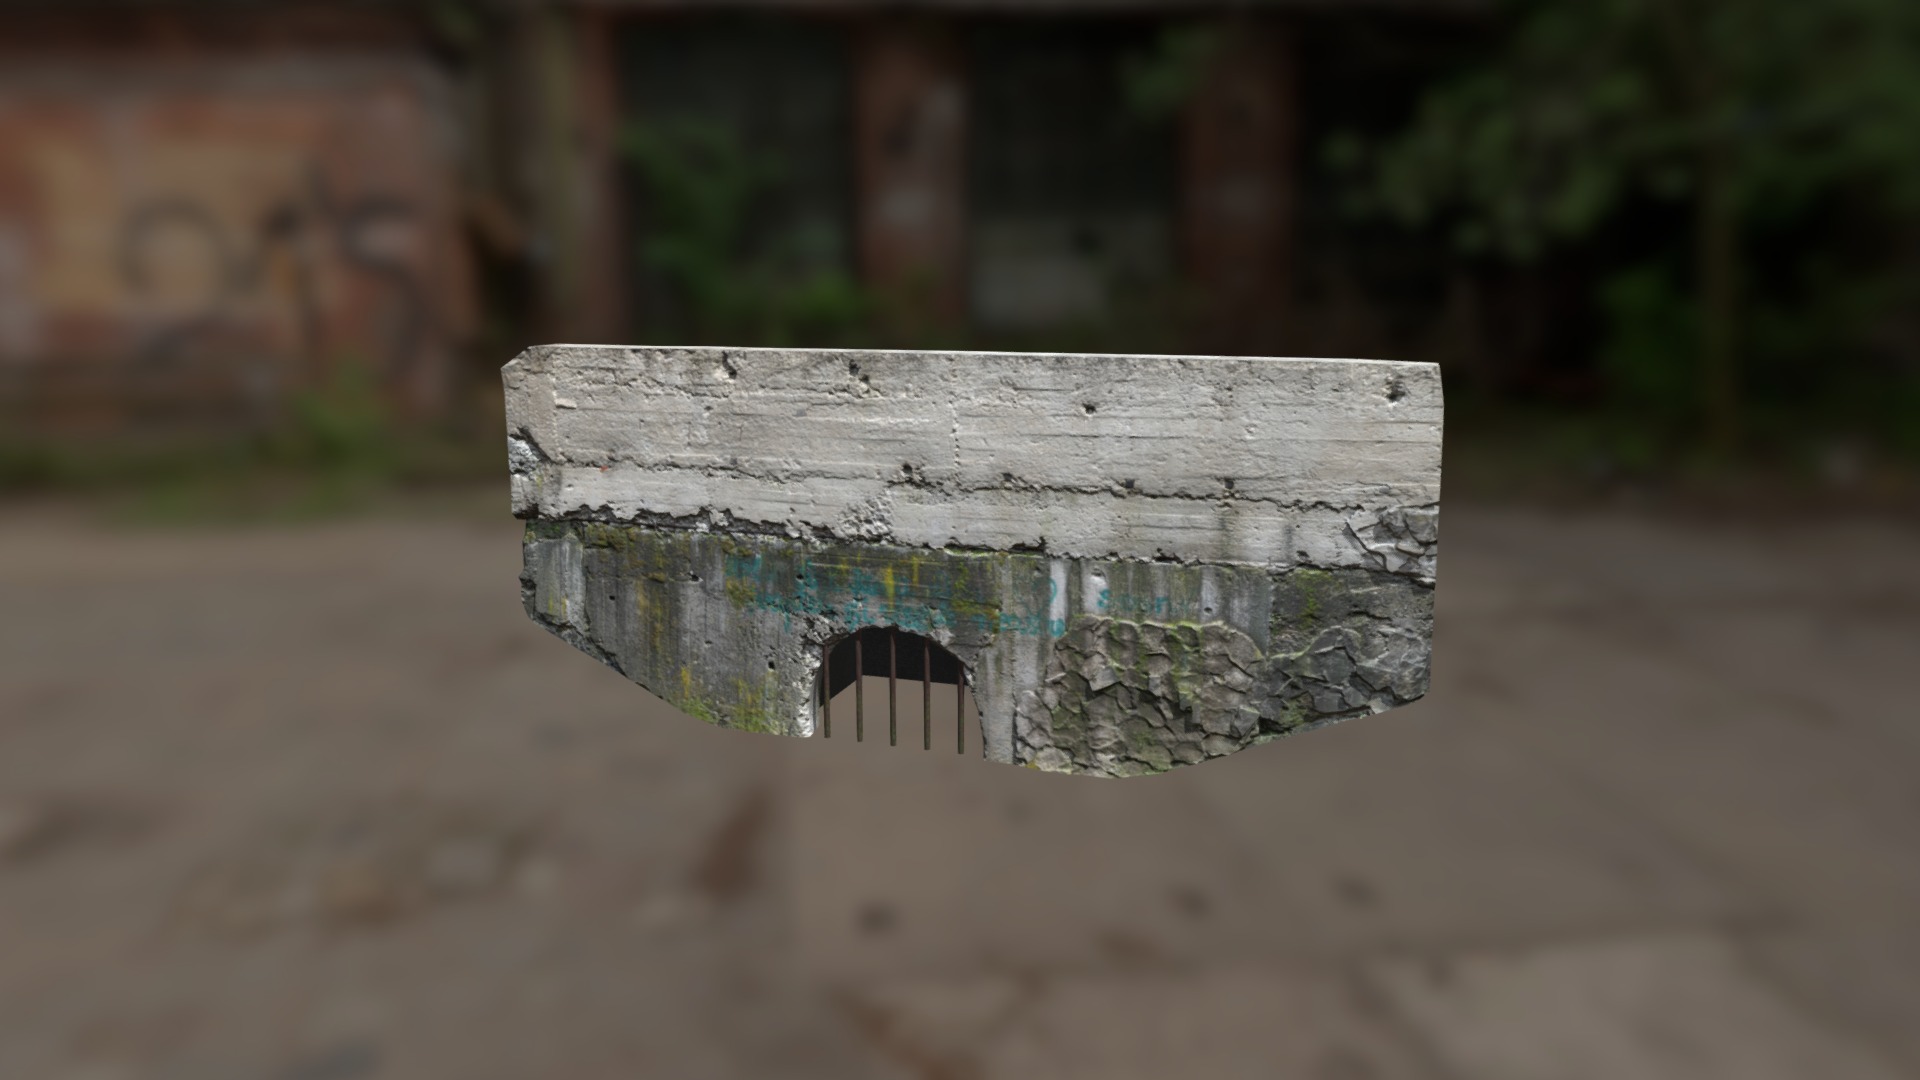 3D model Water Tunnel Lowpoly - This is a 3D model of the Water Tunnel Lowpoly. The 3D model is about a wooden bench on a sidewalk.